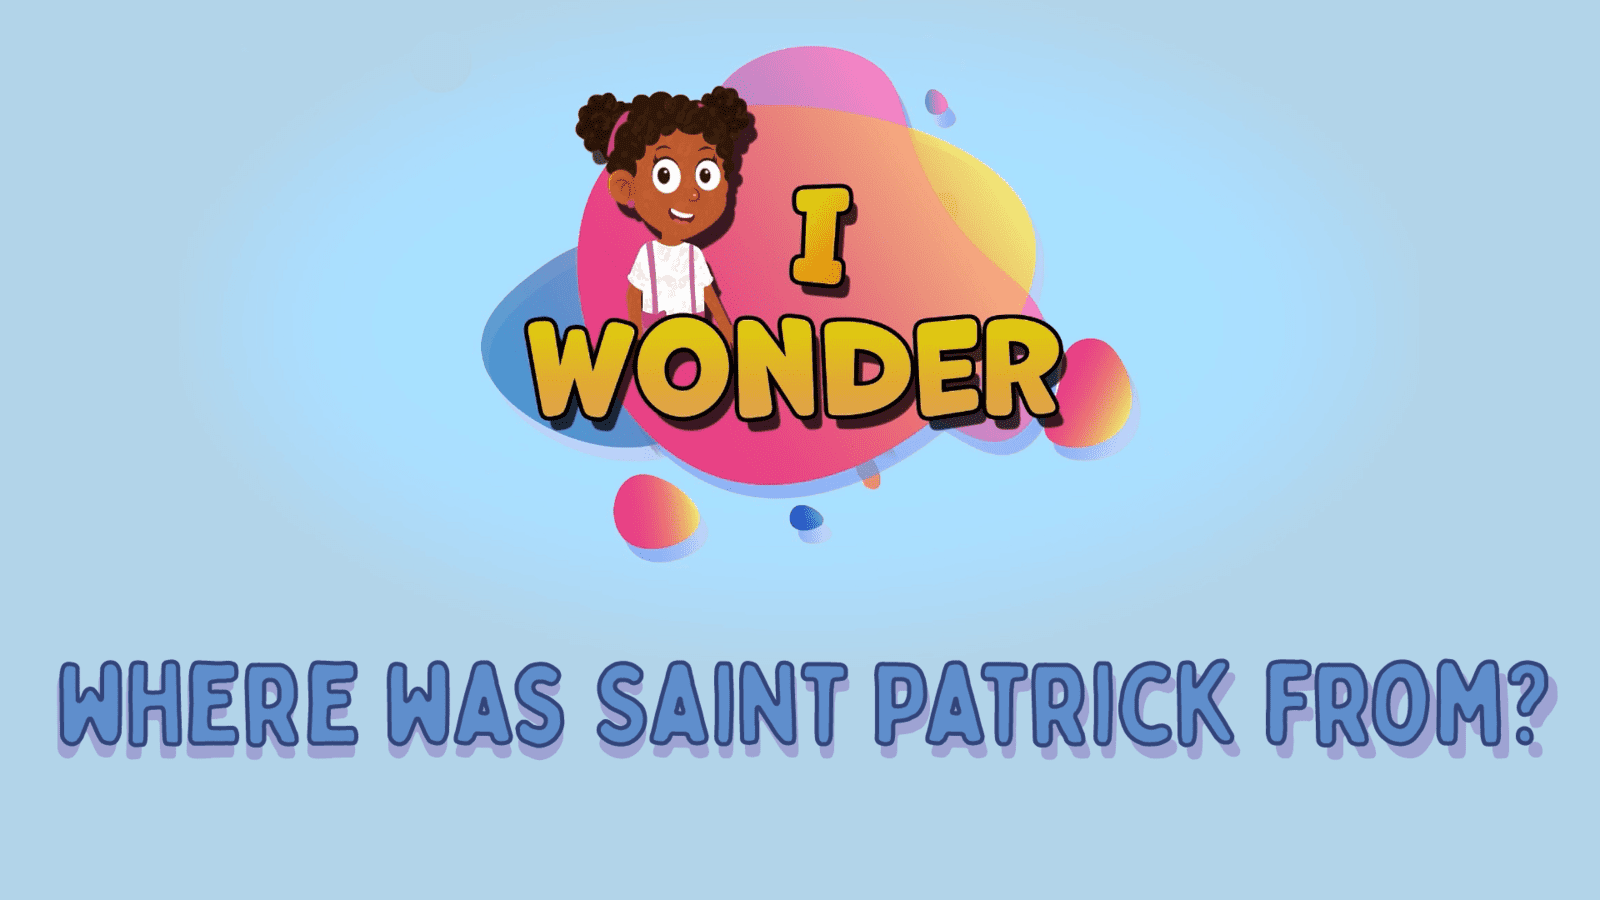 Where Was Saint Patrick From?